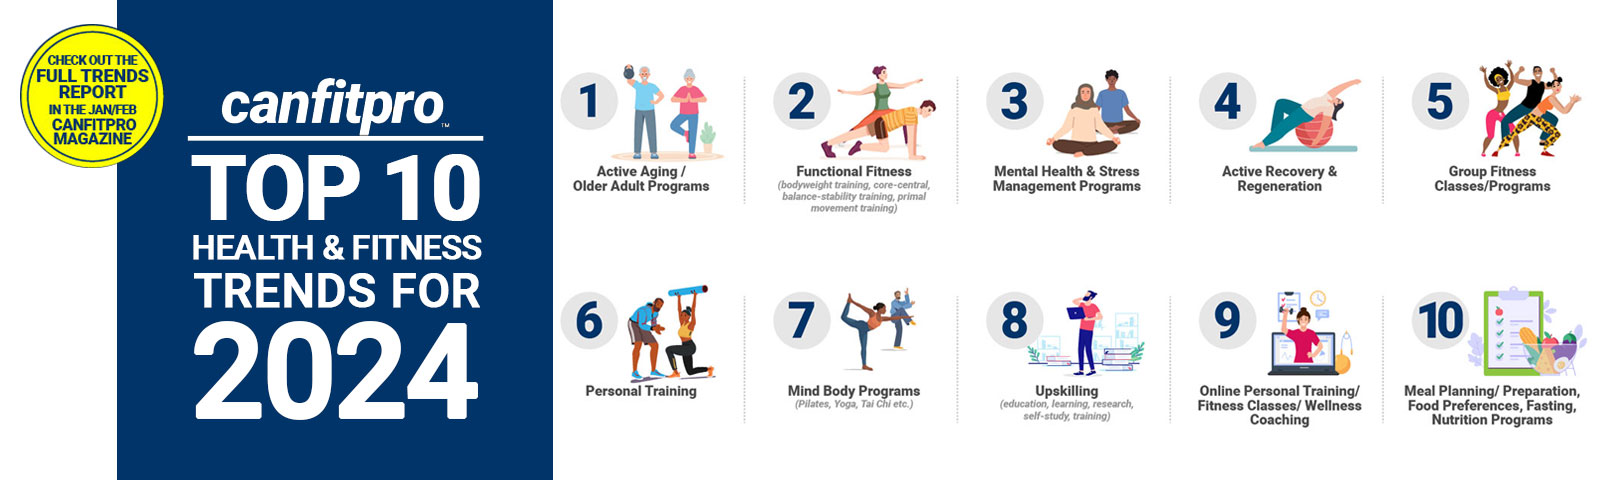 canfitpro Top 10 Health & Fitness Trends 2024